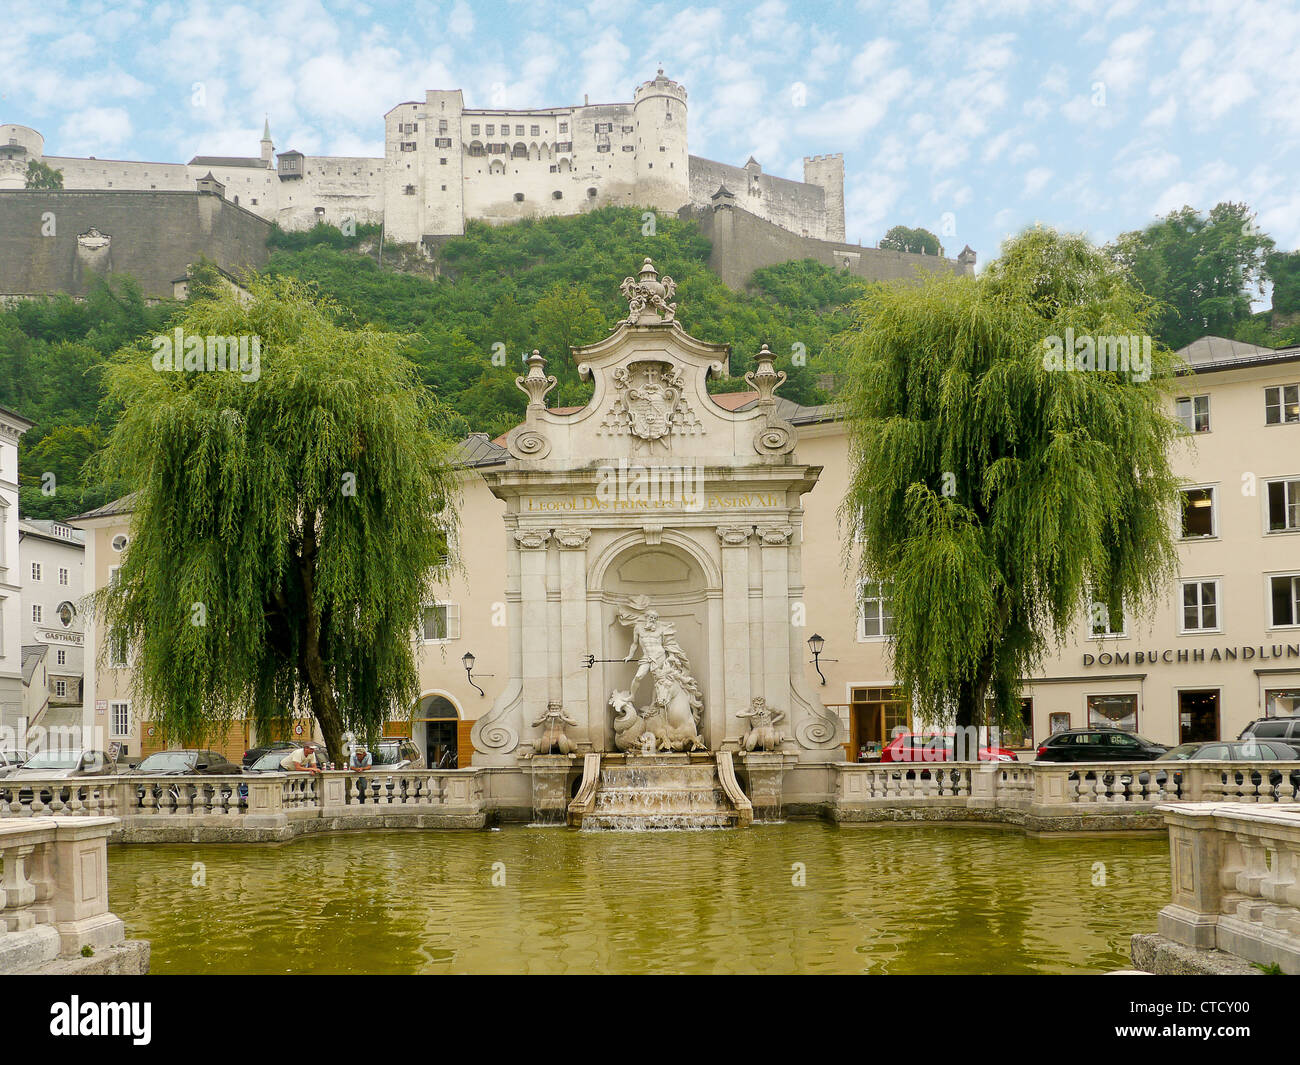 Monument in a water garden with the Hohensalzburg Fortress in the background, Salzburg, Austria Stock Photo